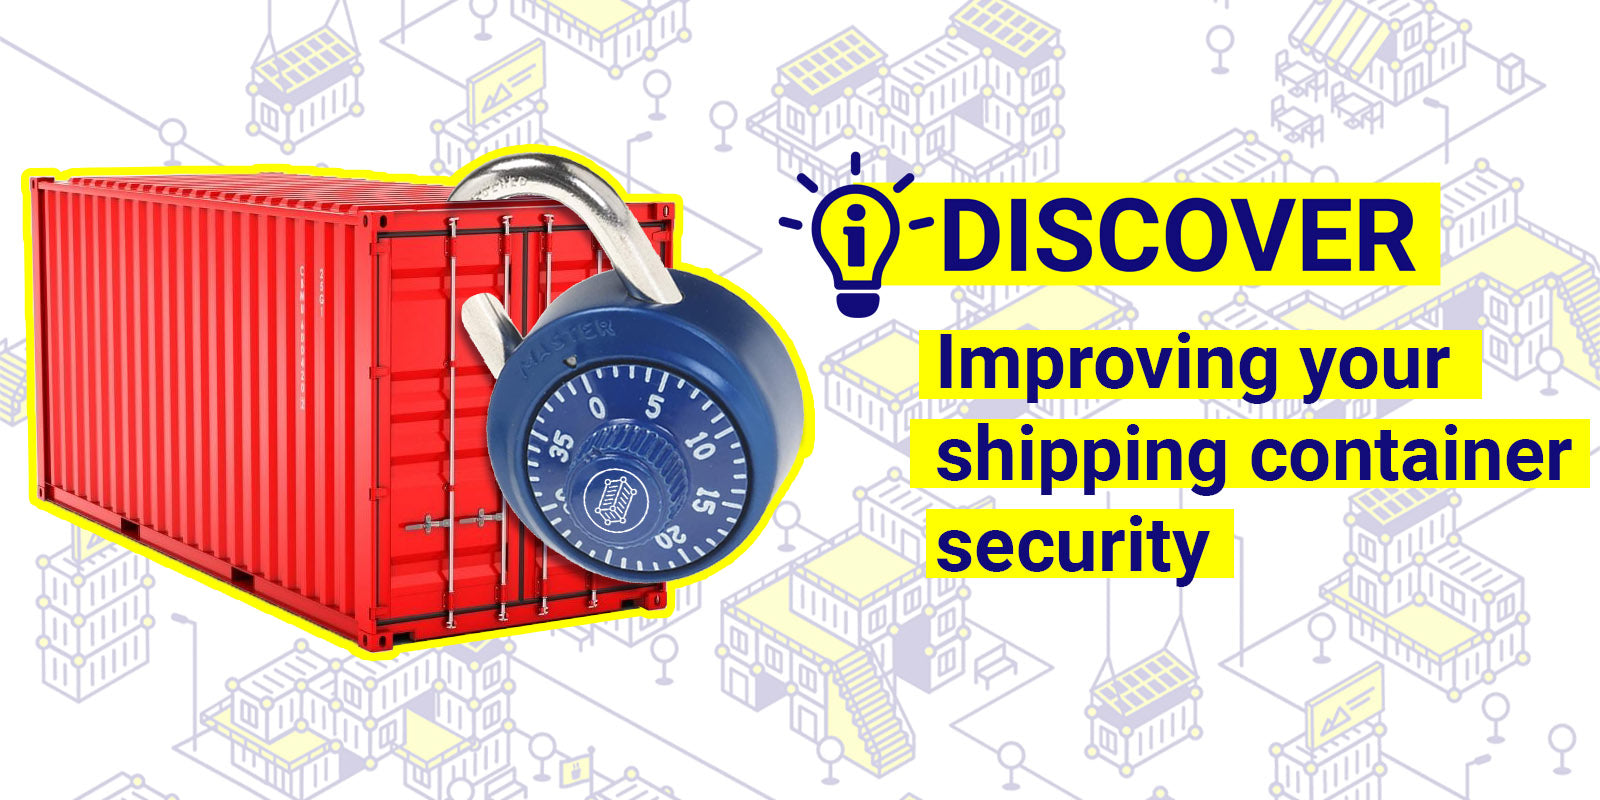 Shipping container with a big security lock and title: "Improving your shipping container security"